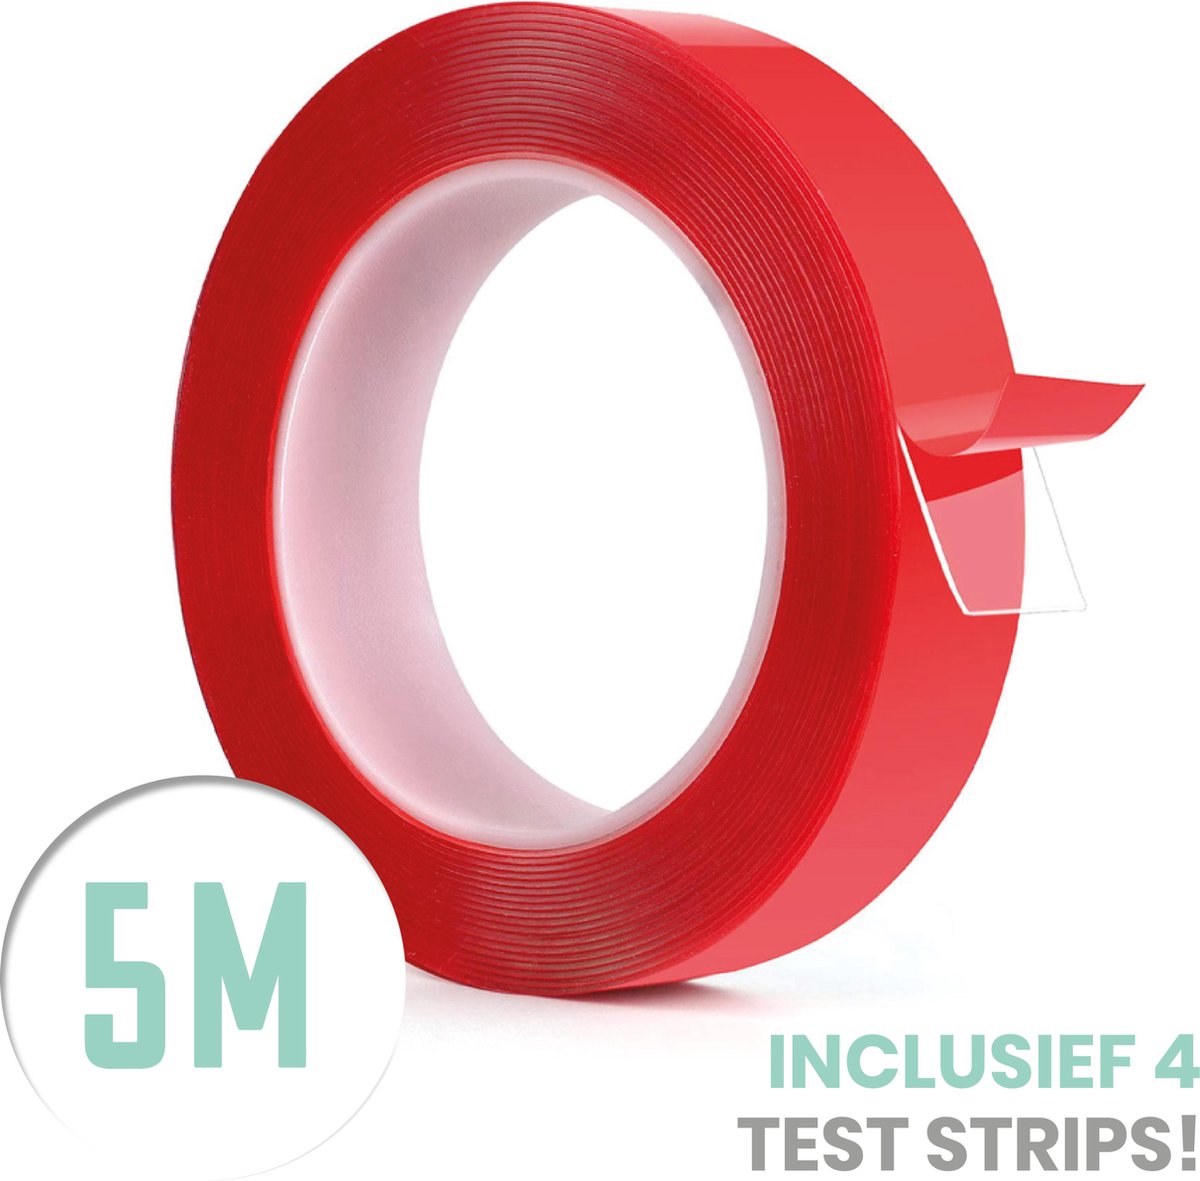 SOLITY® Dubbelzijdig Tape - Montagetape - Extra Sterk - Inclusief Extra’s - Transparant - 5m x 25mm - SOLITY